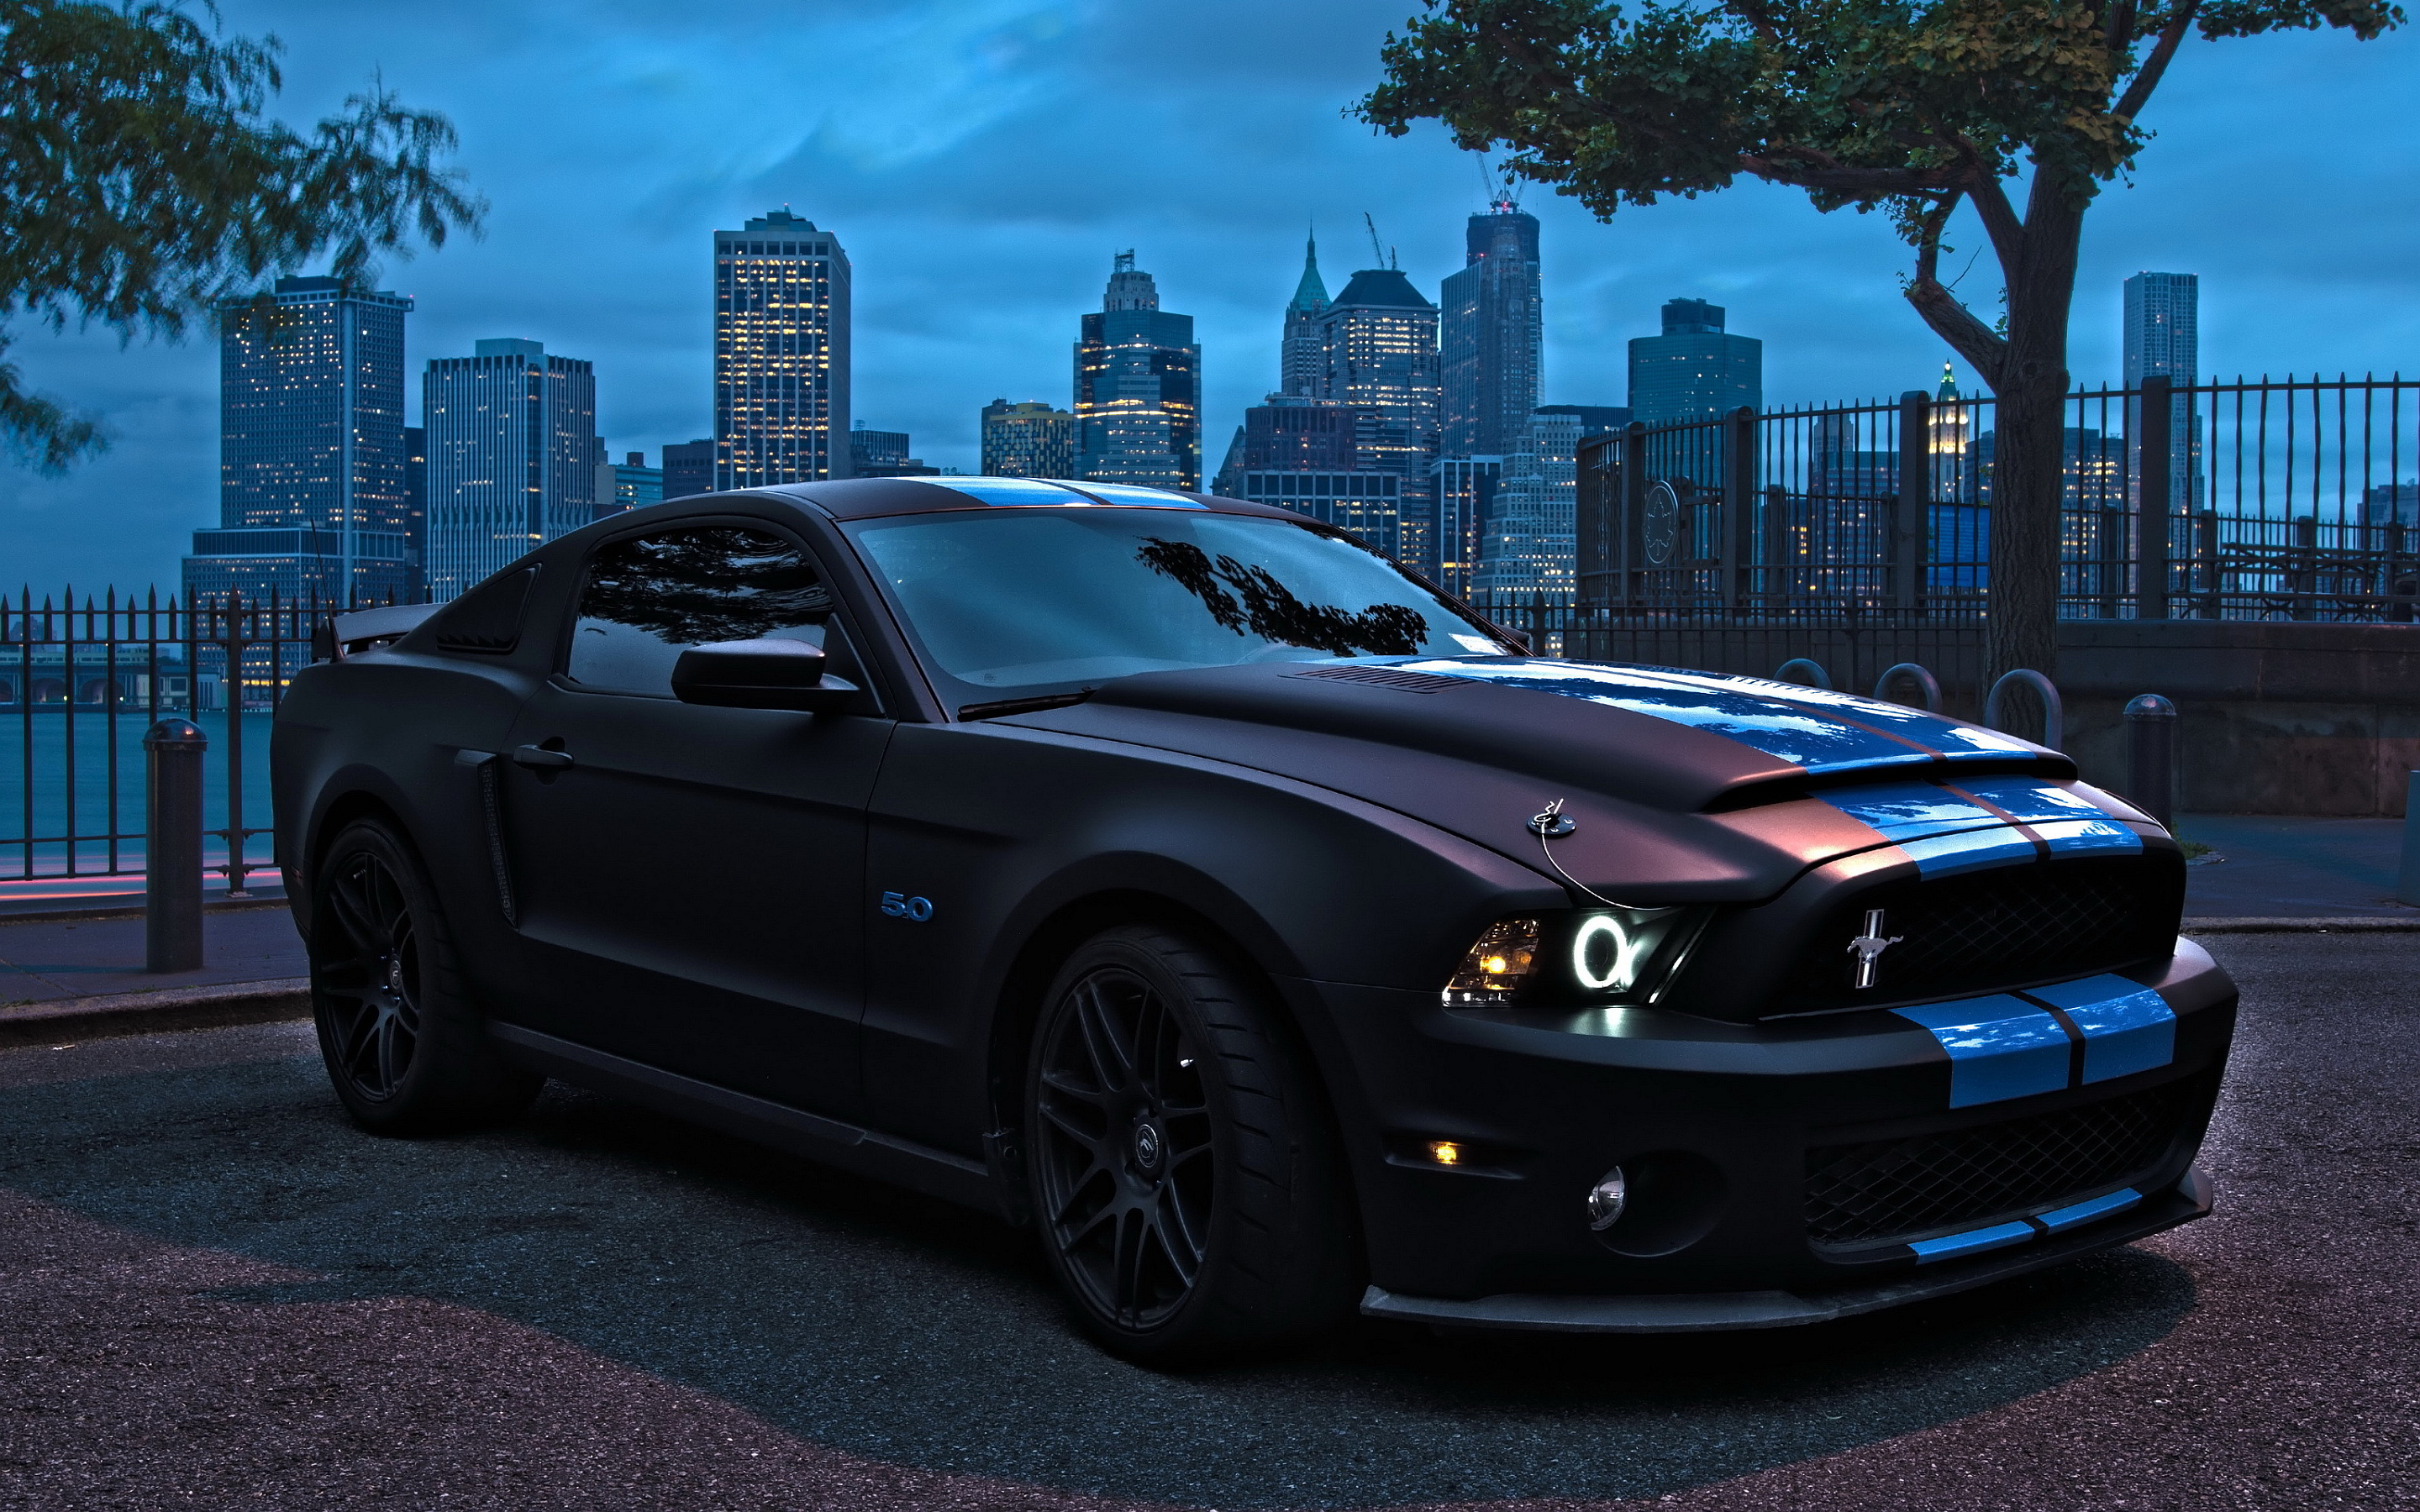 Ford Mustang Shelby Gt500 Wallpaper Background New